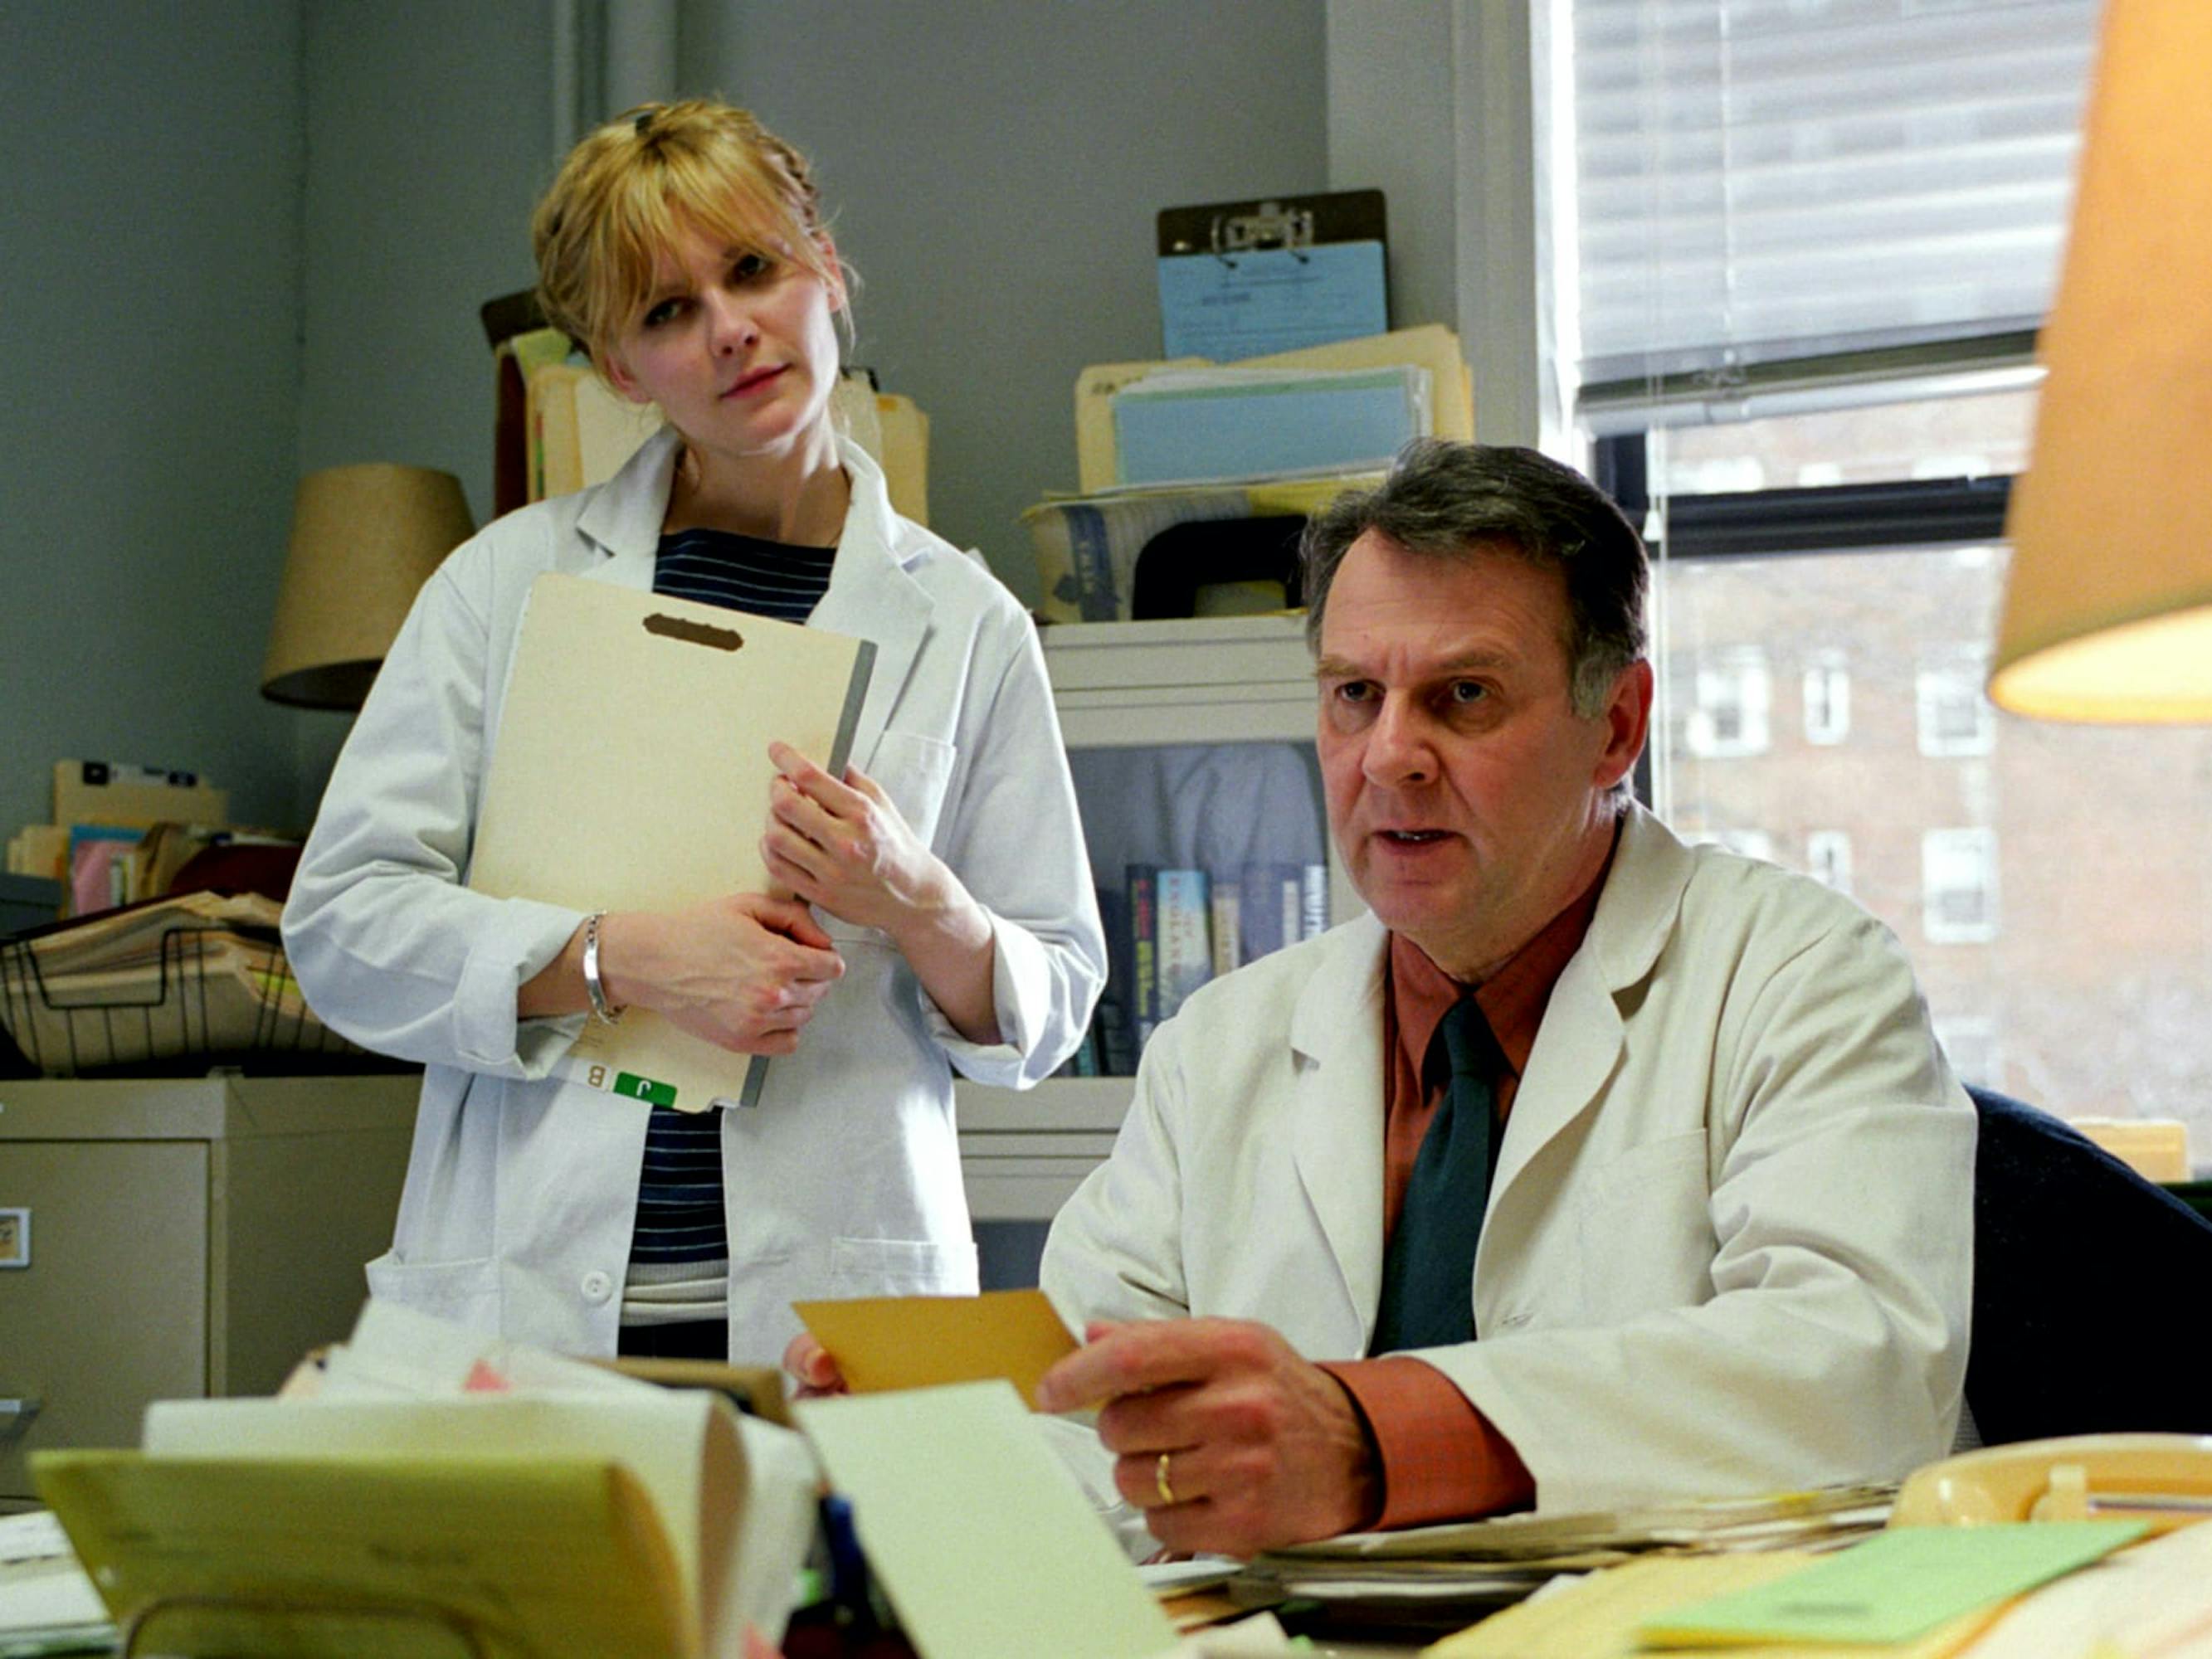 Mary (Kirsten Dunst) and Dr. Mierzwiak (Tom Wilkinson) stand in an office surrounded by filing cabinets and folders. They both wear white jackets.